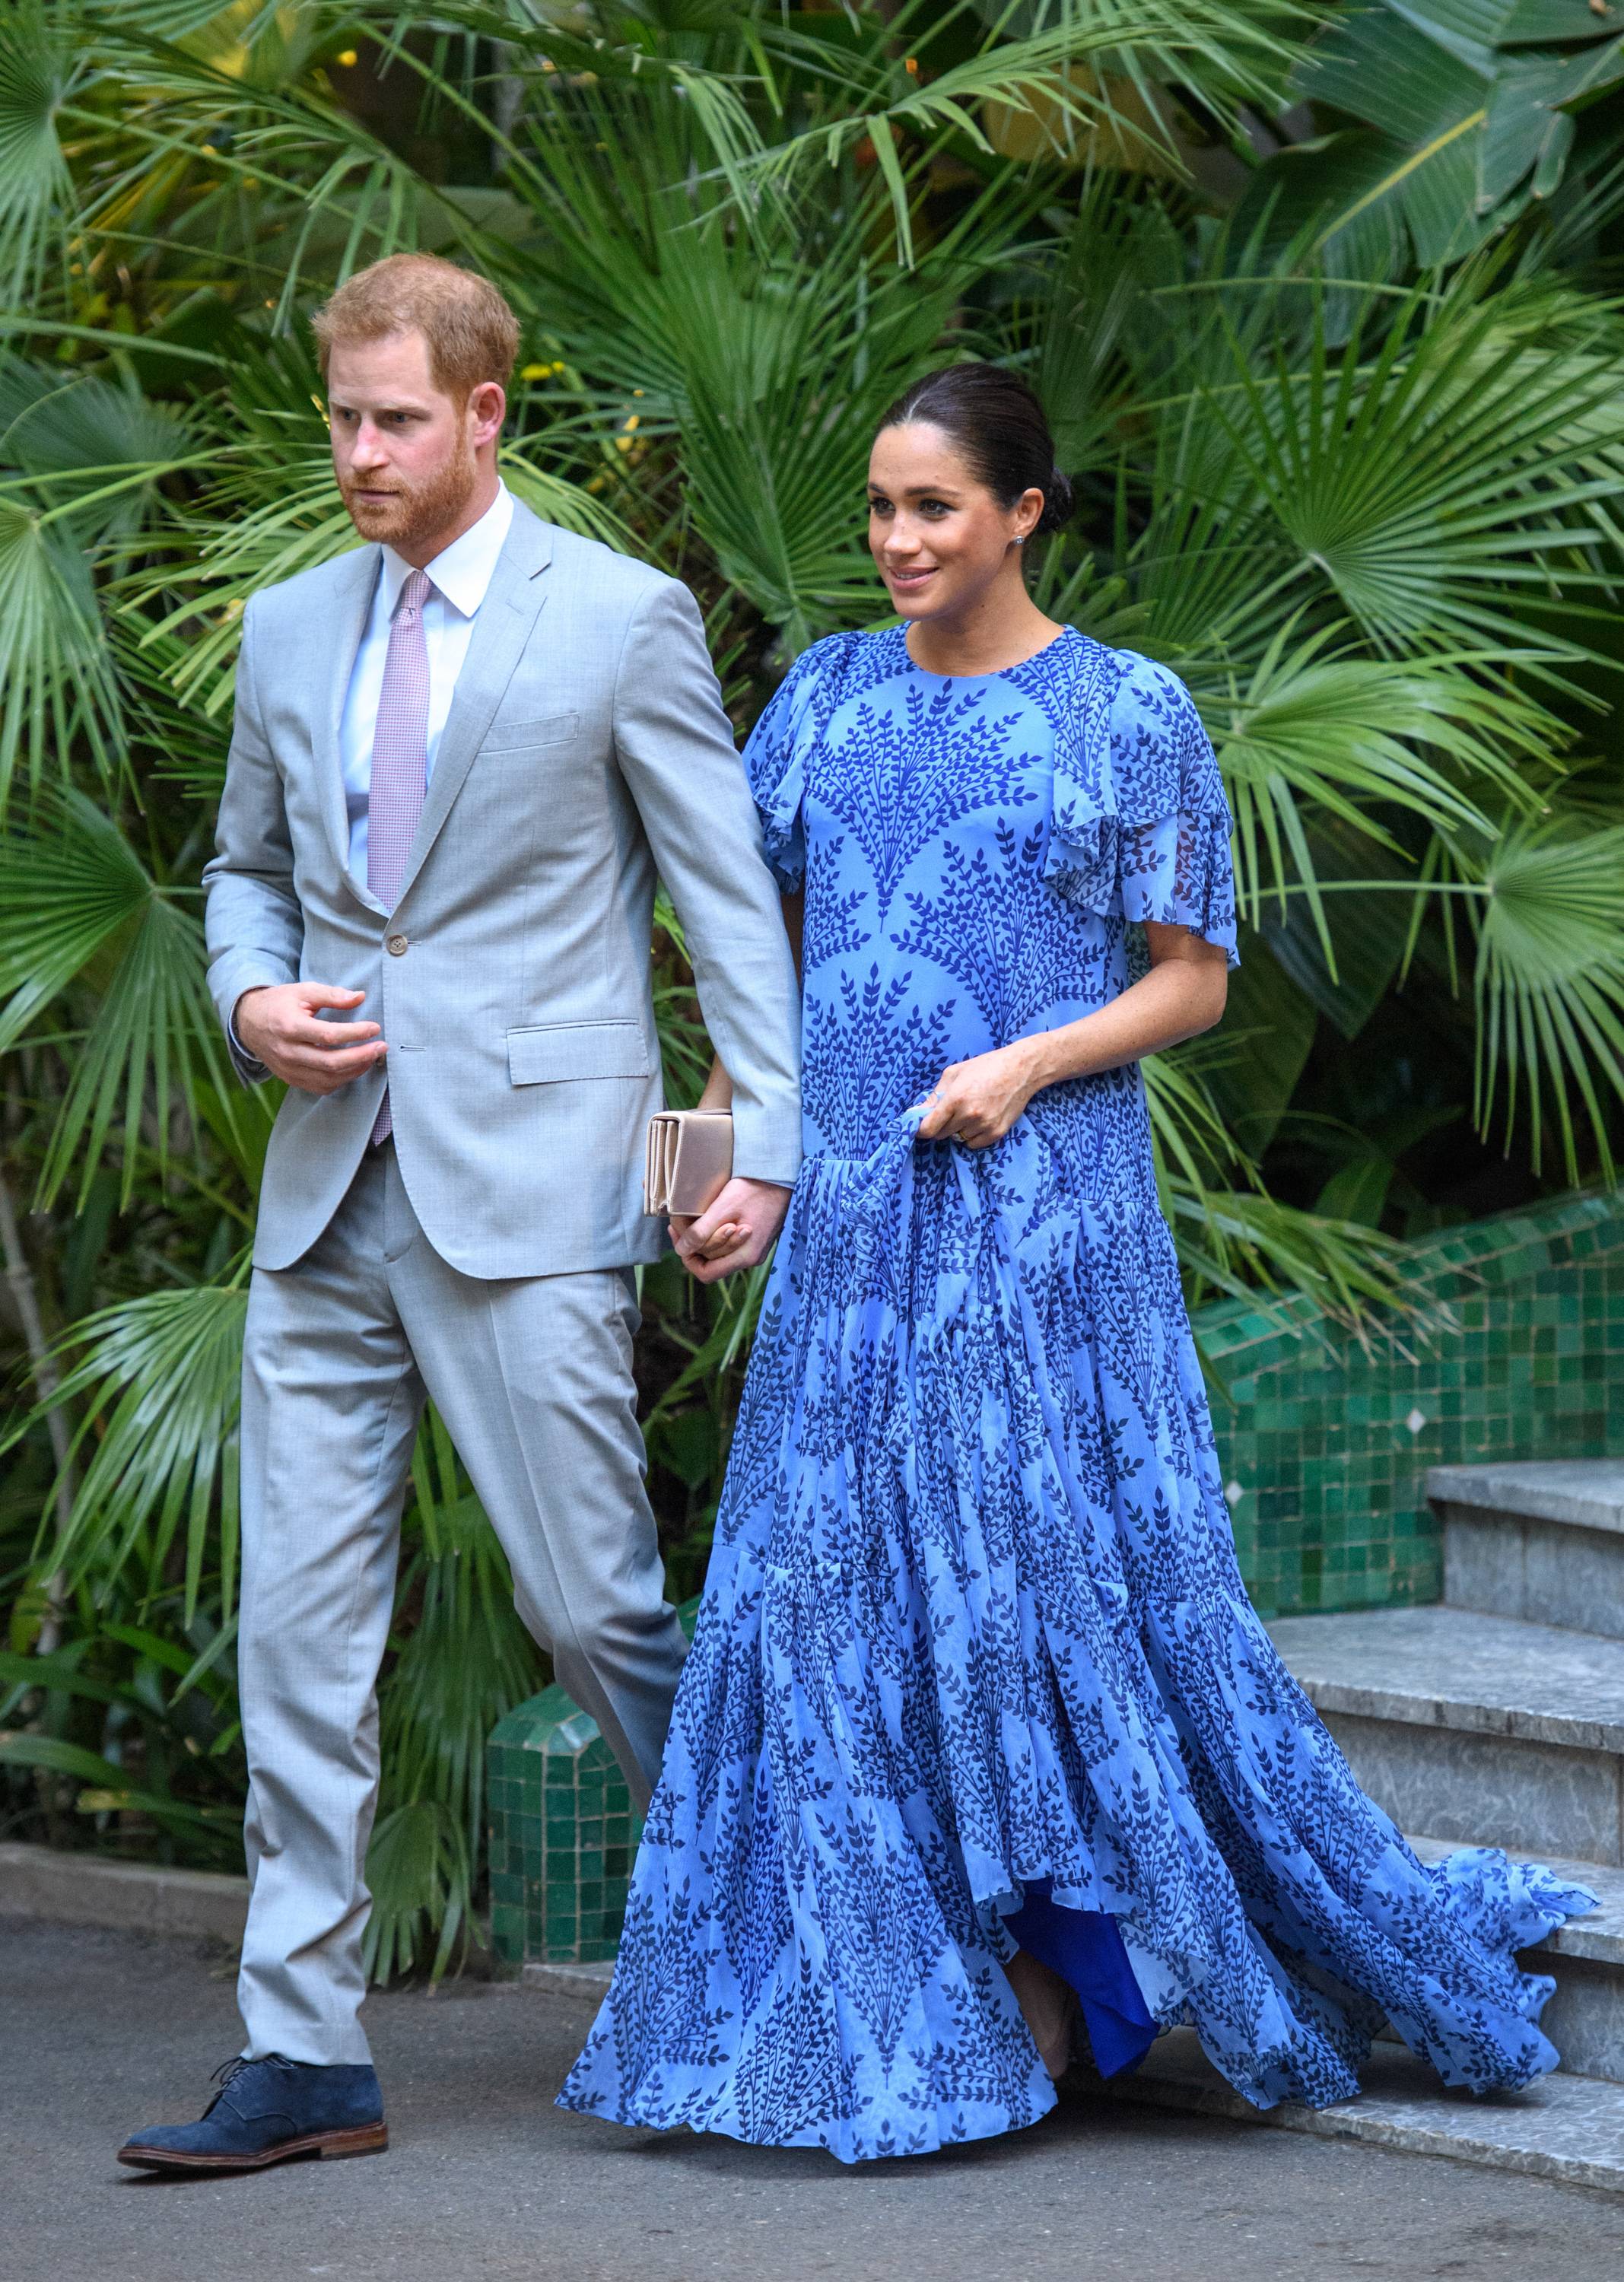 Baby Blue - On the the Duchess of Sussex' last day in Morrocco, she was bumping around with her hubby and visited the crown prince, Mohammed VI, and his family. The pregnant duchess wore a custom Carolina Herrera blue, Morocco-inspired gown ($2,900). Is she hinting to the gender of the next royal baby? (Photo: Tim Rooke/Pool/Samir Hussein/WireImage)